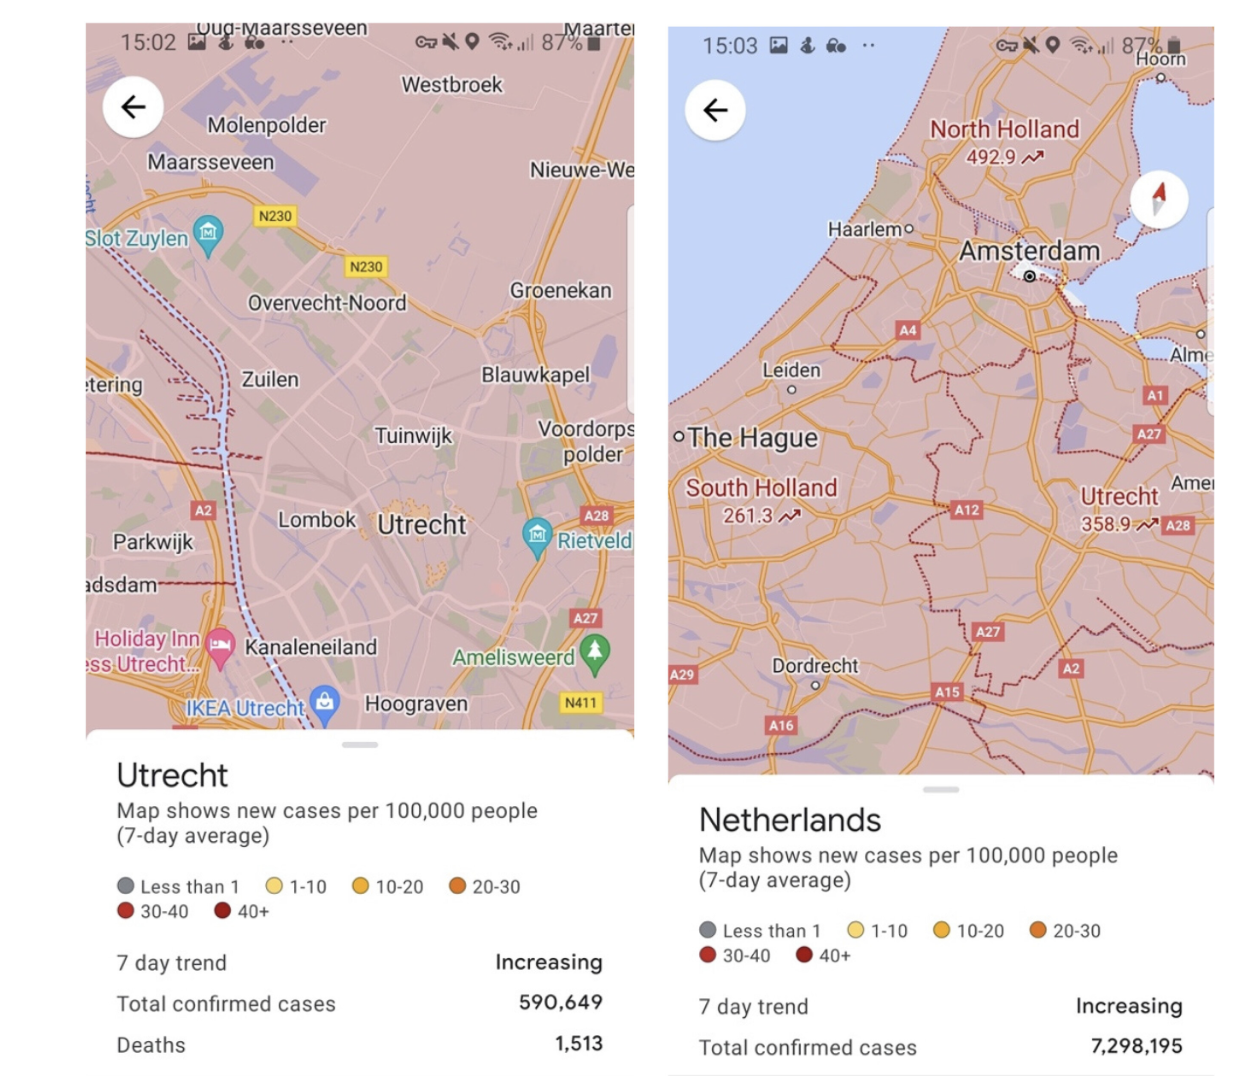 Google Maps’ COVID-19 layer as an interface for pandemic life